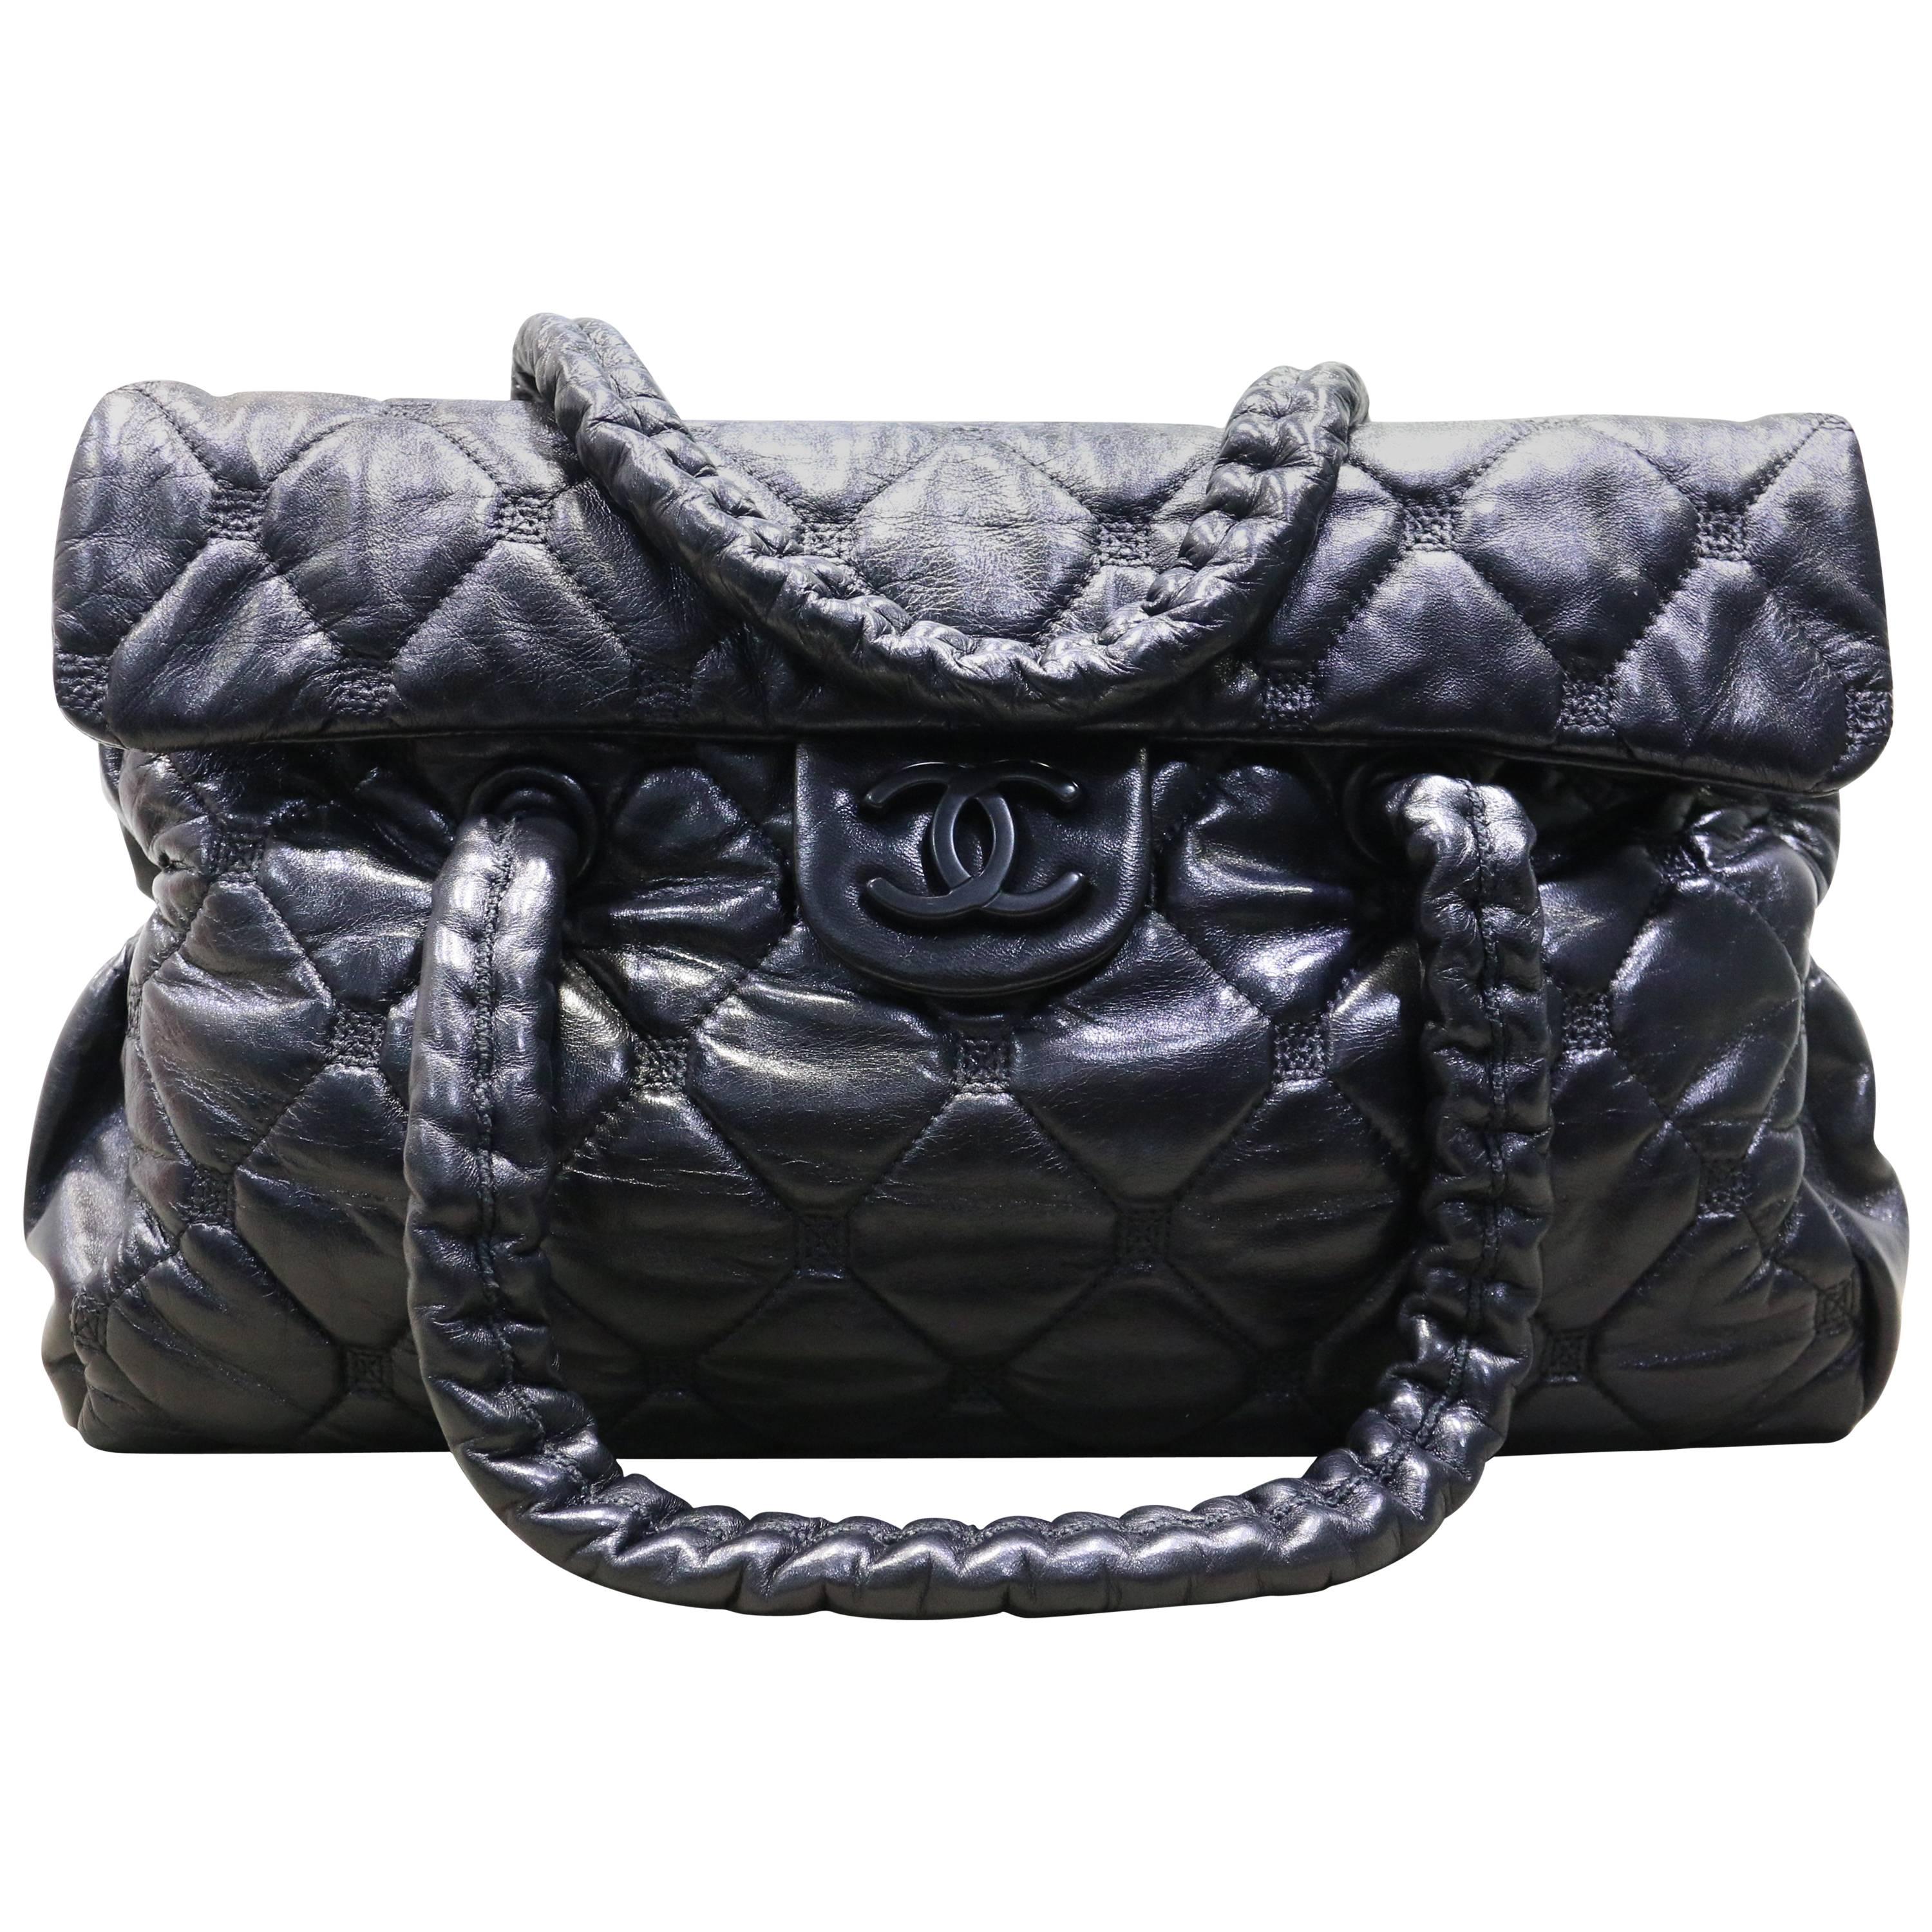 Chanel Black Quilted Lambskin Leather Double Straps Handbag 